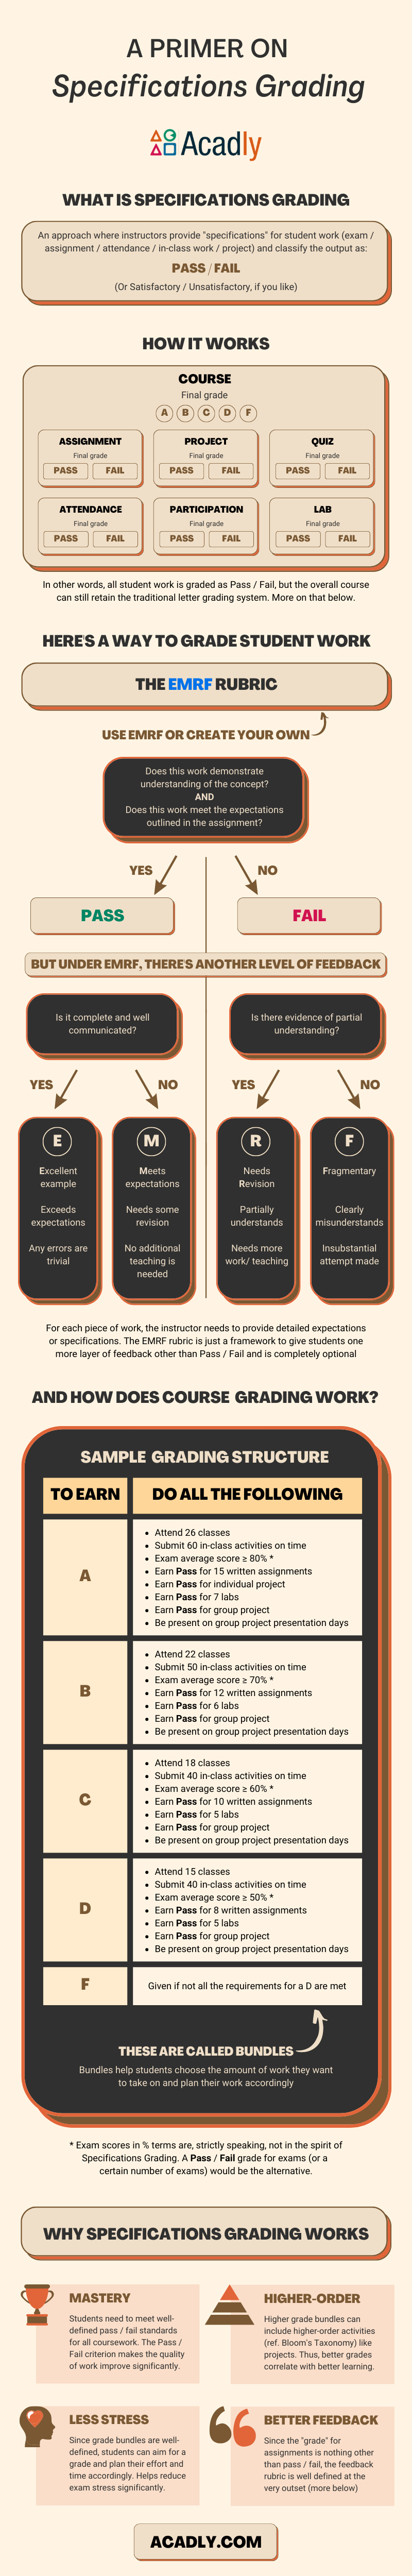 Infographic describing how specifications grading works.